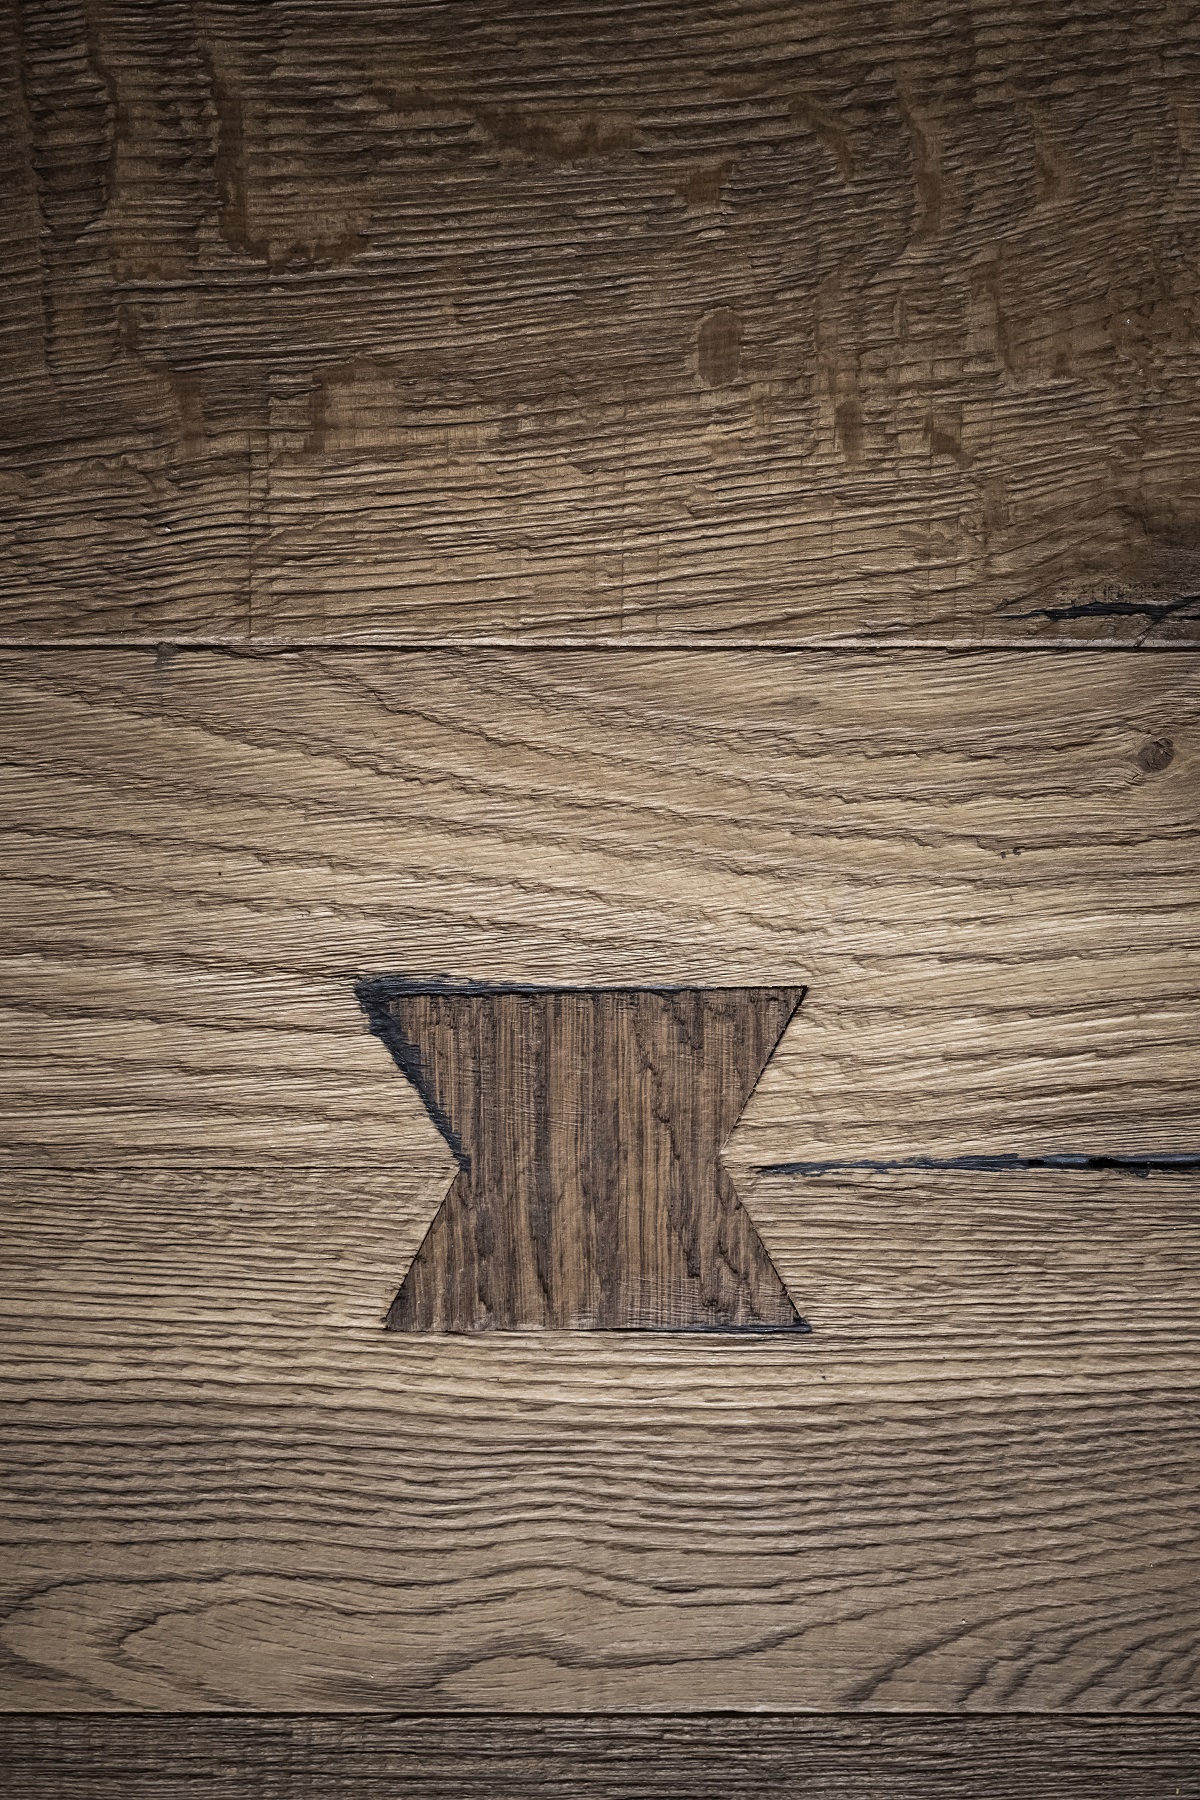 woodwork detail as part of the restaurant design